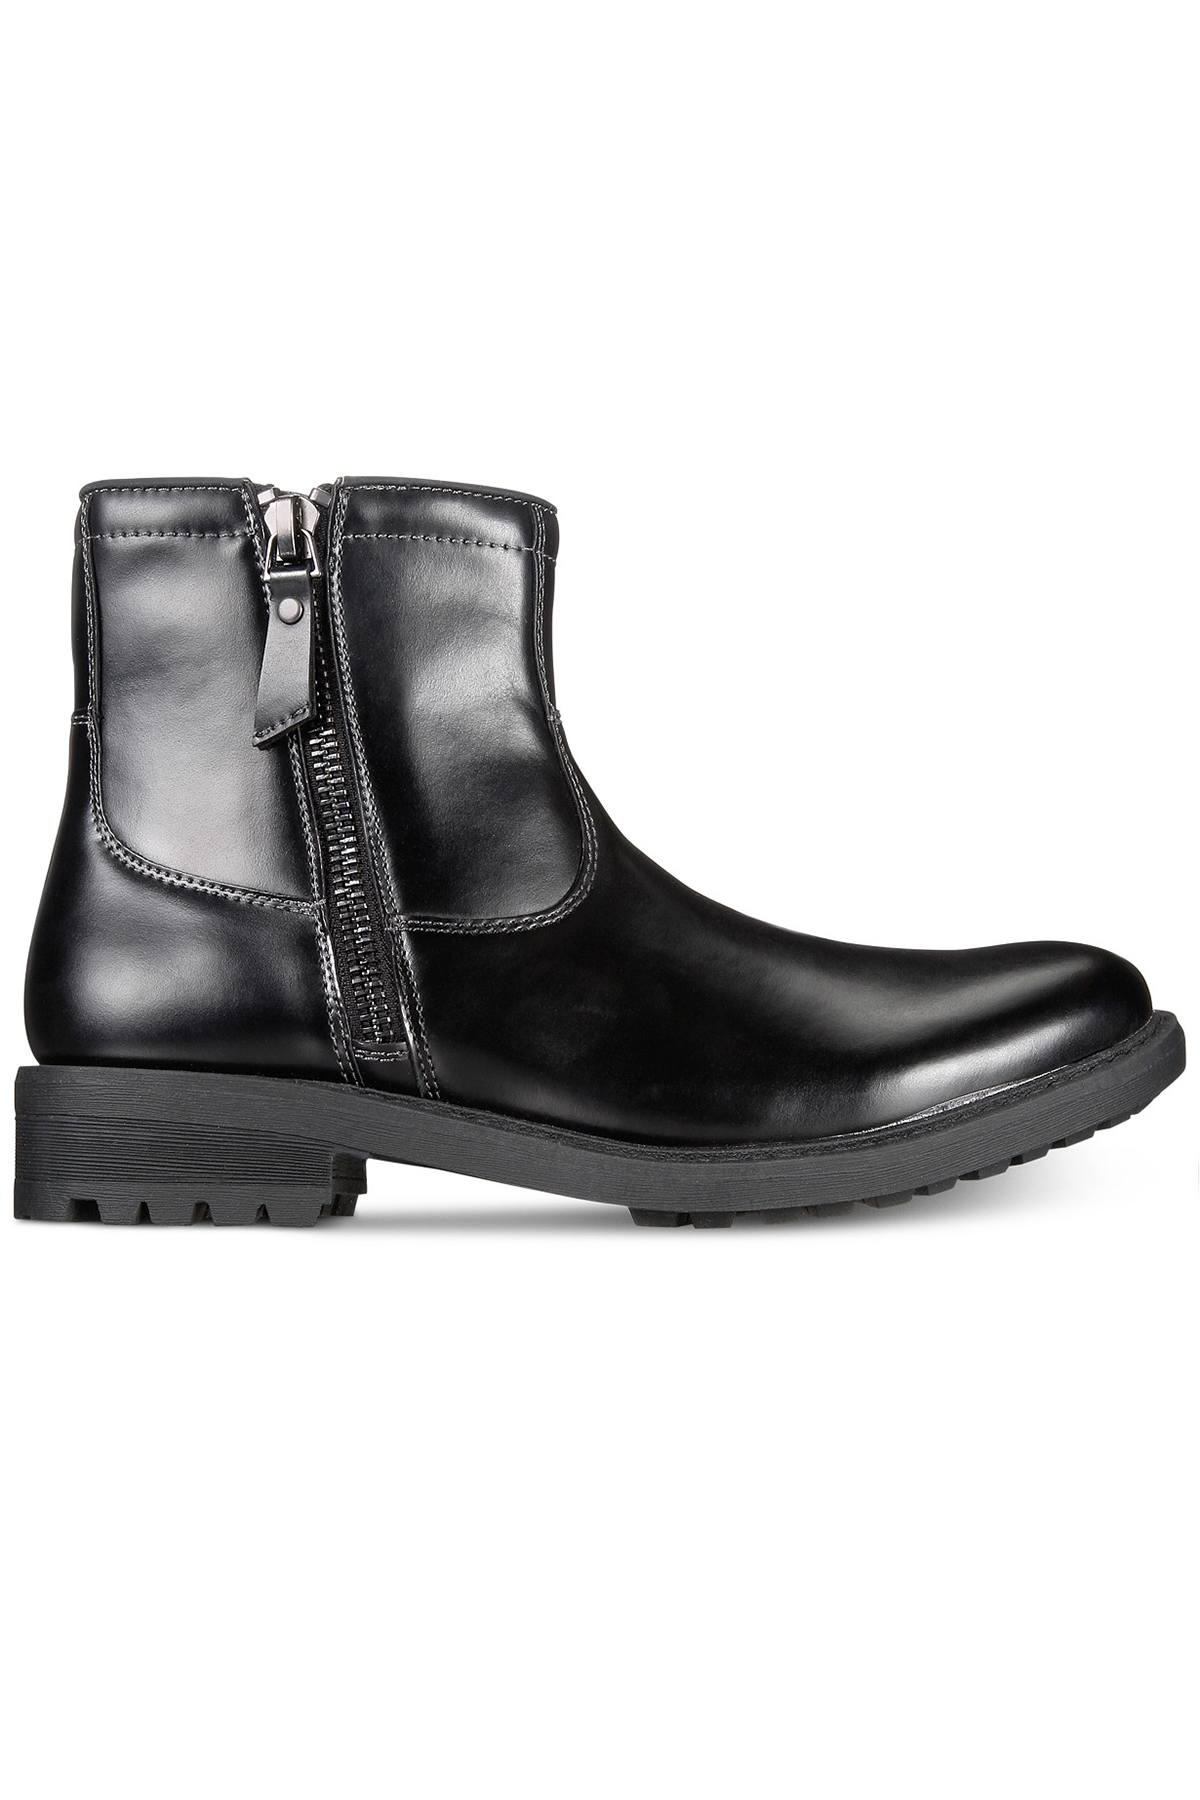 Unlisted by Kenneth Cole Black C-Roam Zip-Up Boot